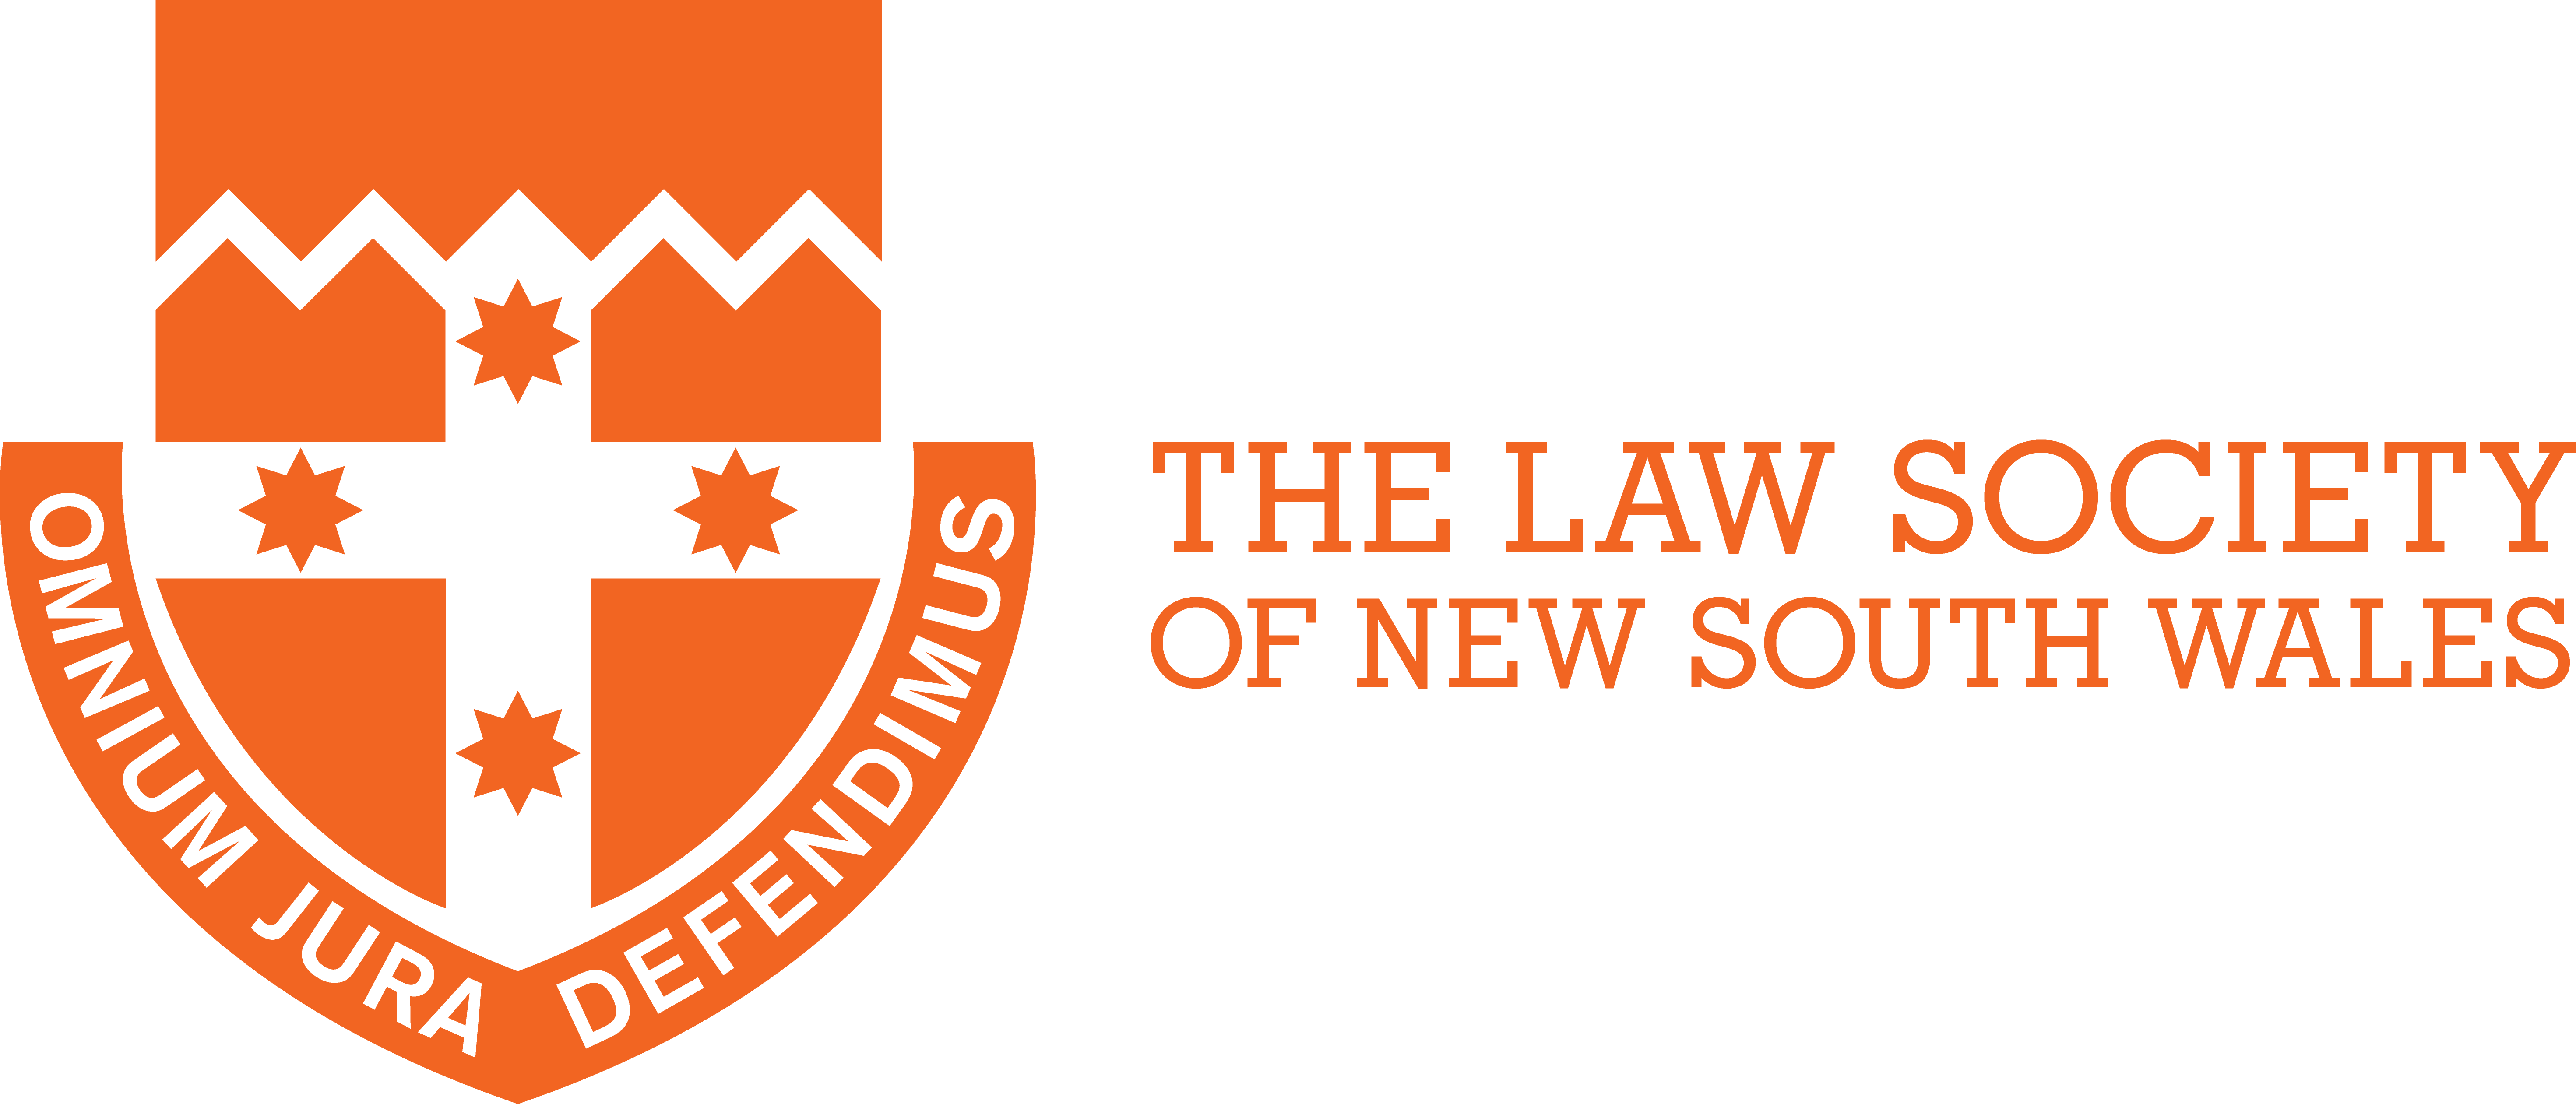 Law Society of New South WalesLaw Society of New South Wales